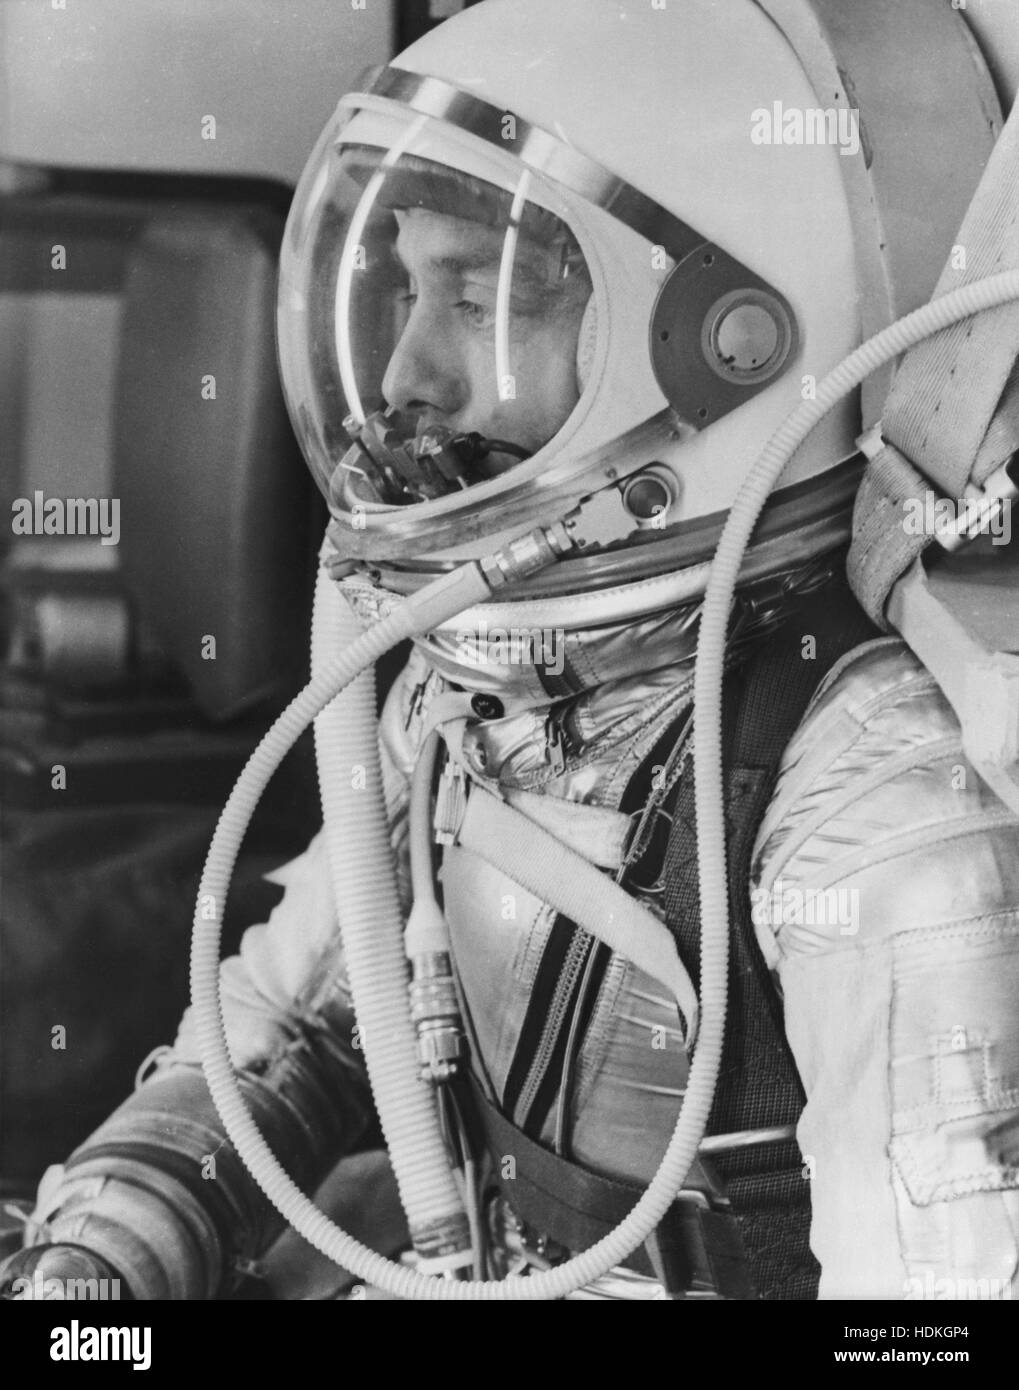 NASA astronaut Alan Shepard suits up in a pressure suit and helmet in preparation for the Mercury-Redstone 3 (MR-3) flight, the first American human spaceflight, aboard the Freedom 7 capsule at the Cape Canaveral Air Force Station Launch Complex 5 January 1, 1961 in Cape Canaveral, Florida. Stock Photo